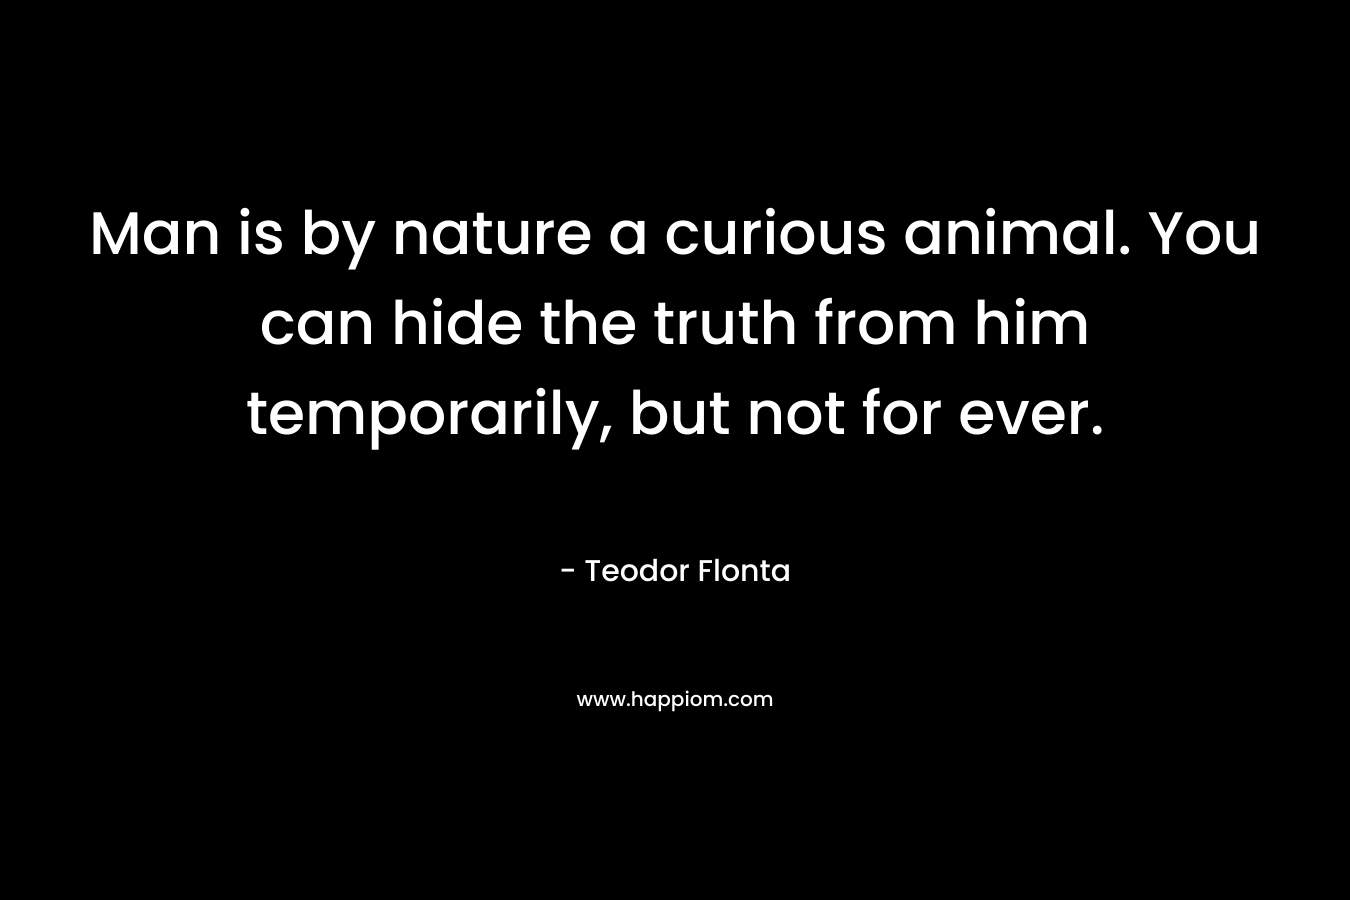 Man is by nature a curious animal. You can hide the truth from him temporarily, but not for ever.